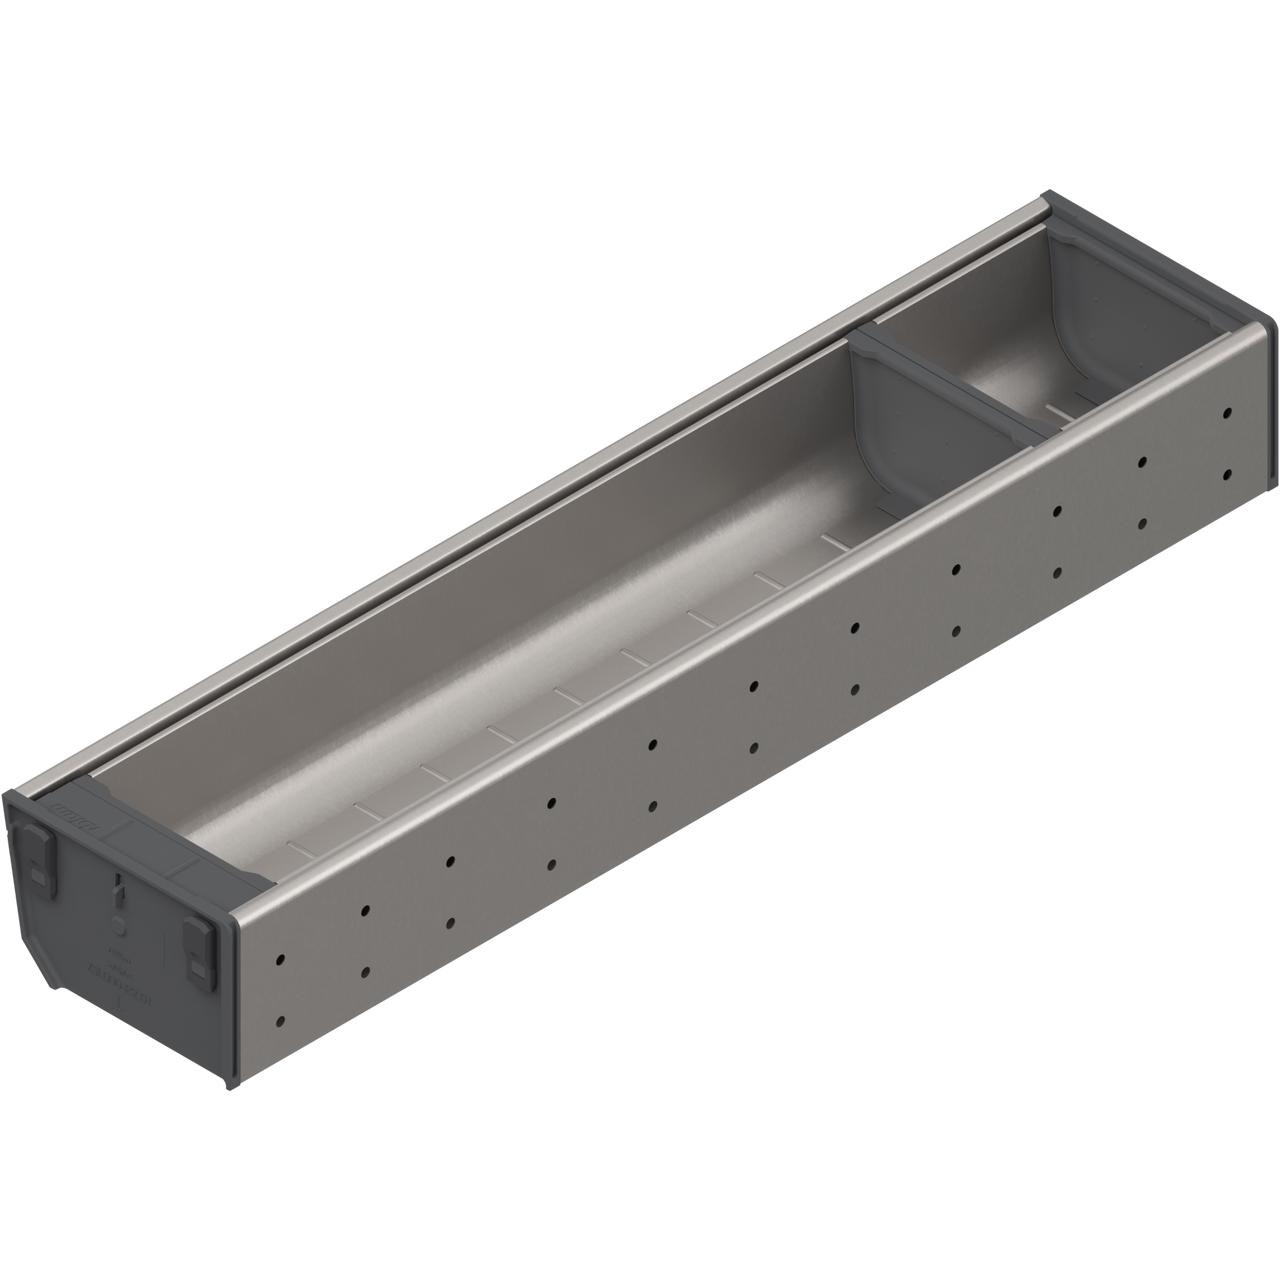  Blum ZSI.550BI1N ORGA-LINE odds and ends set, for TANDEMBOX drawer, NL=550 mm, width=103 mm 